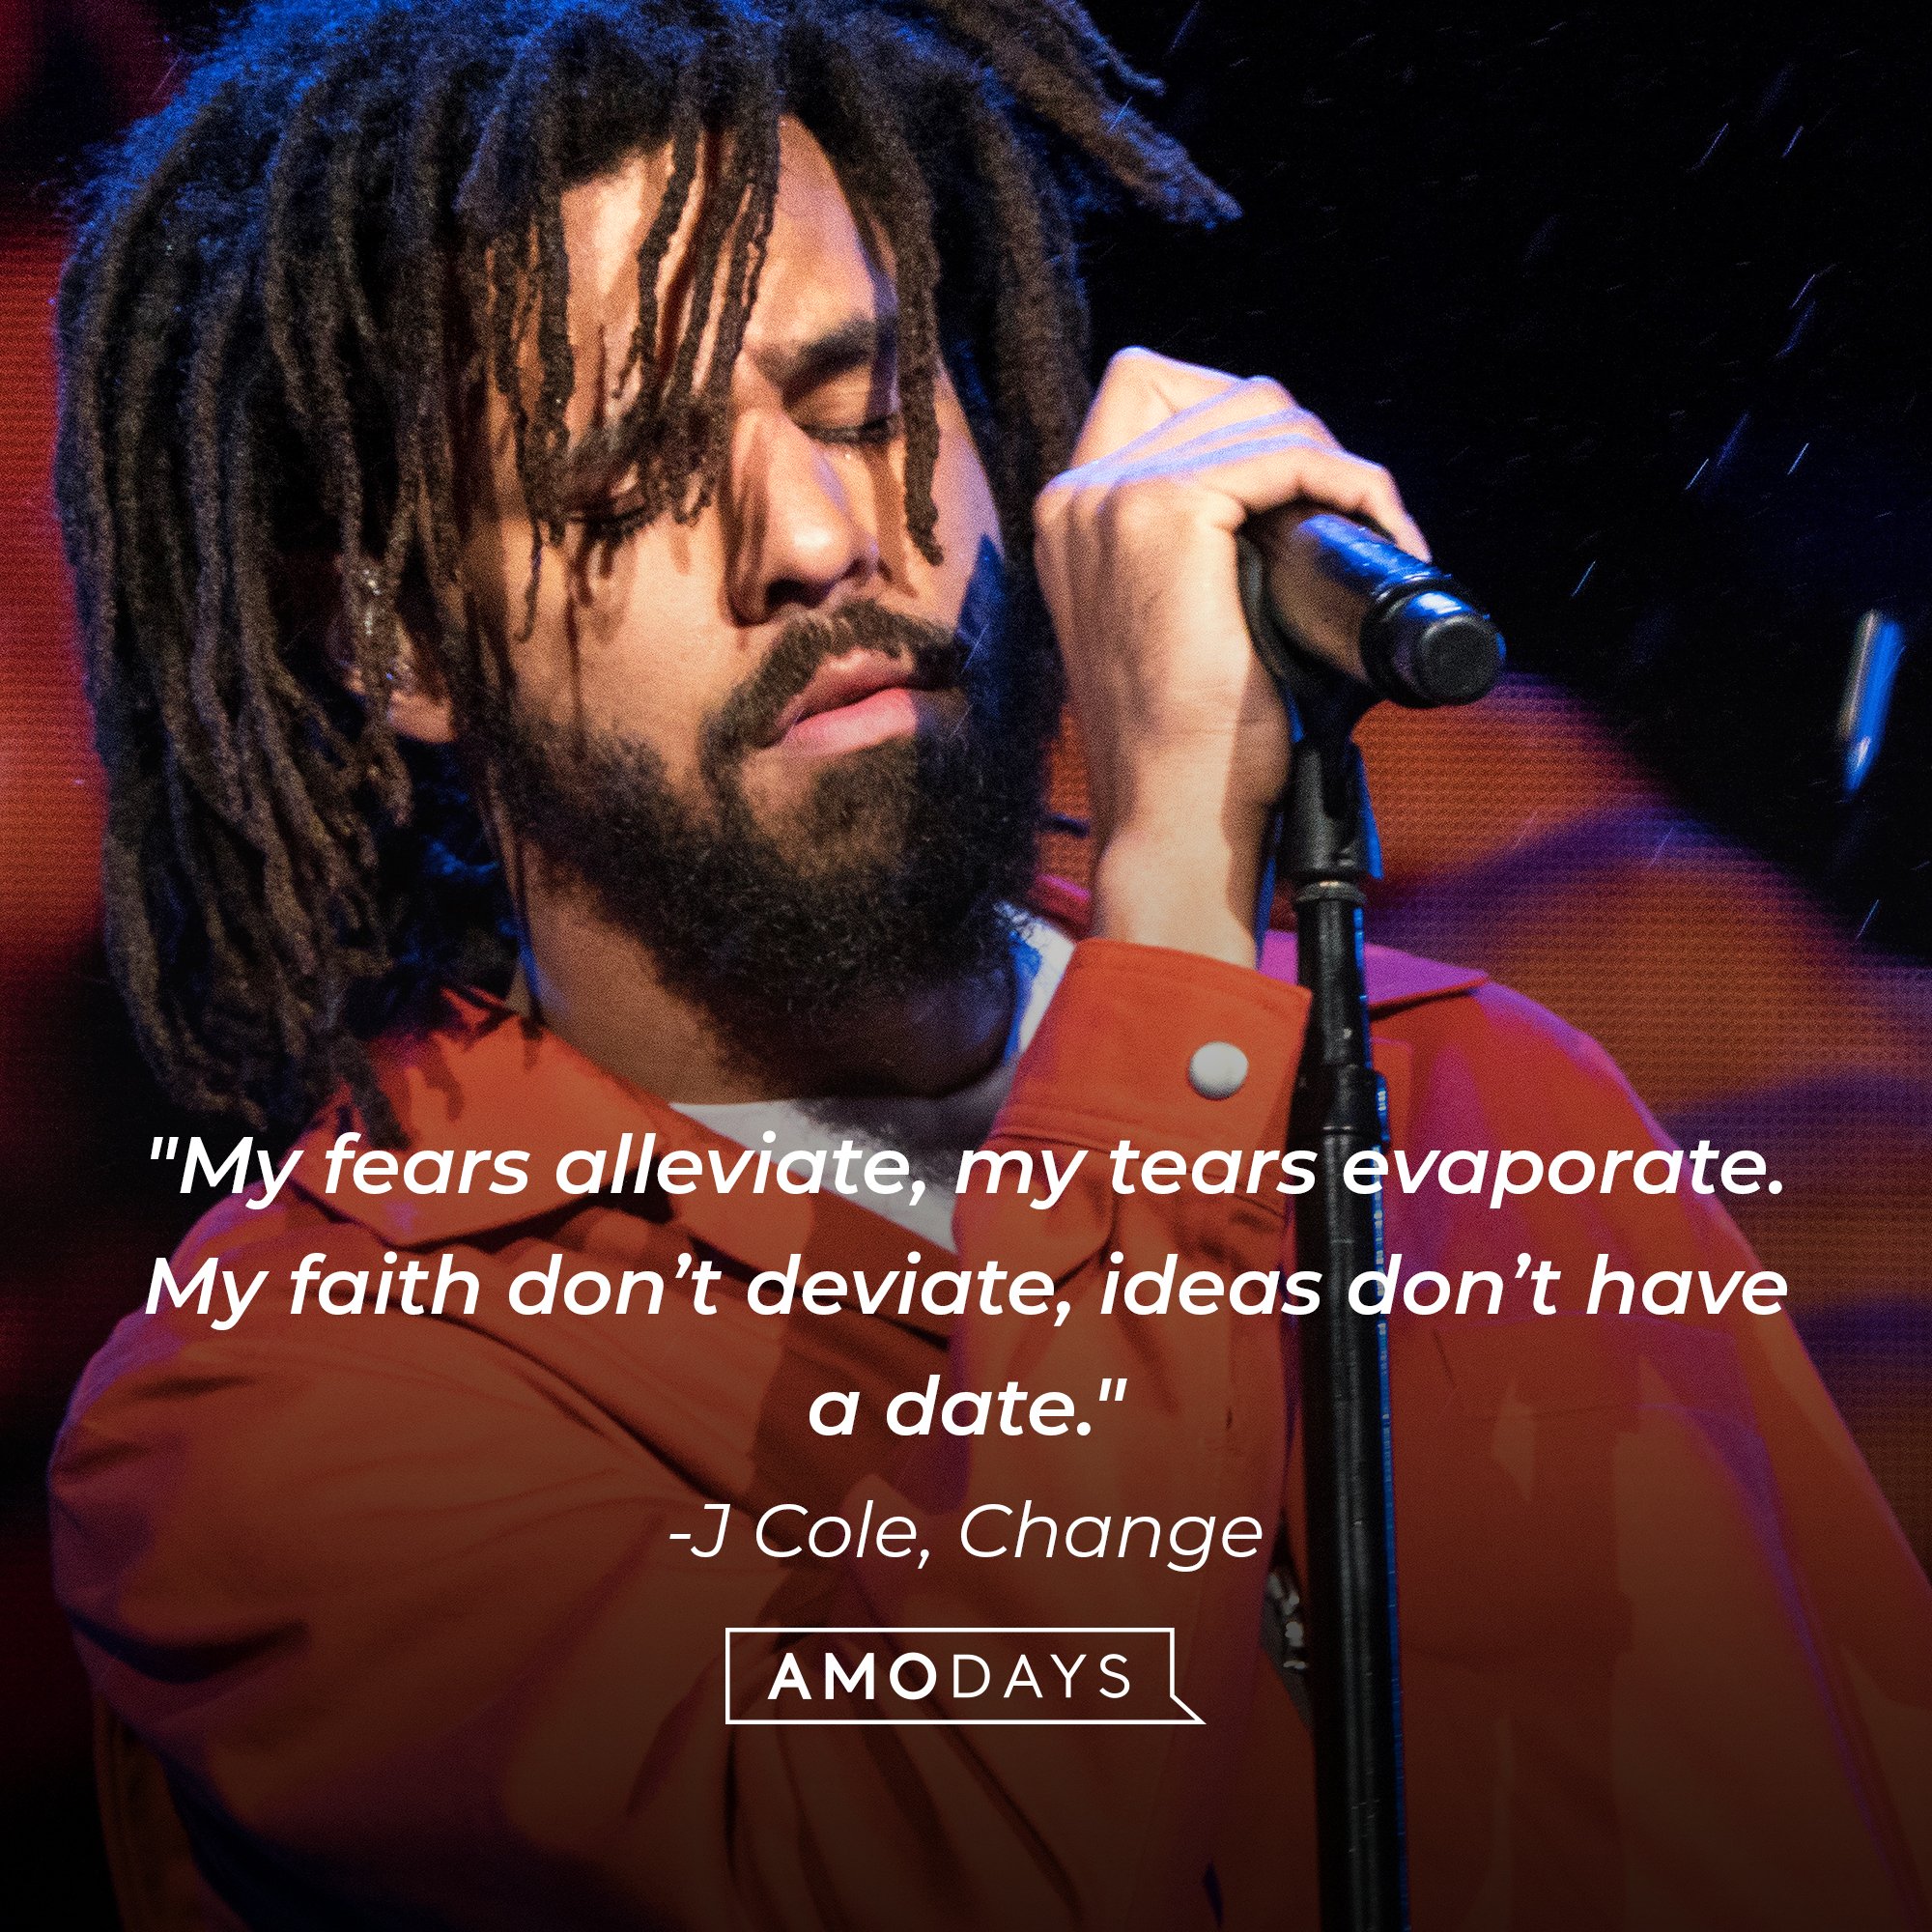 J Cole's quote: "My fears alleviate, my tears evaporate My faith don’t deviate, ideas don’t have a date." | Image: AmoDays